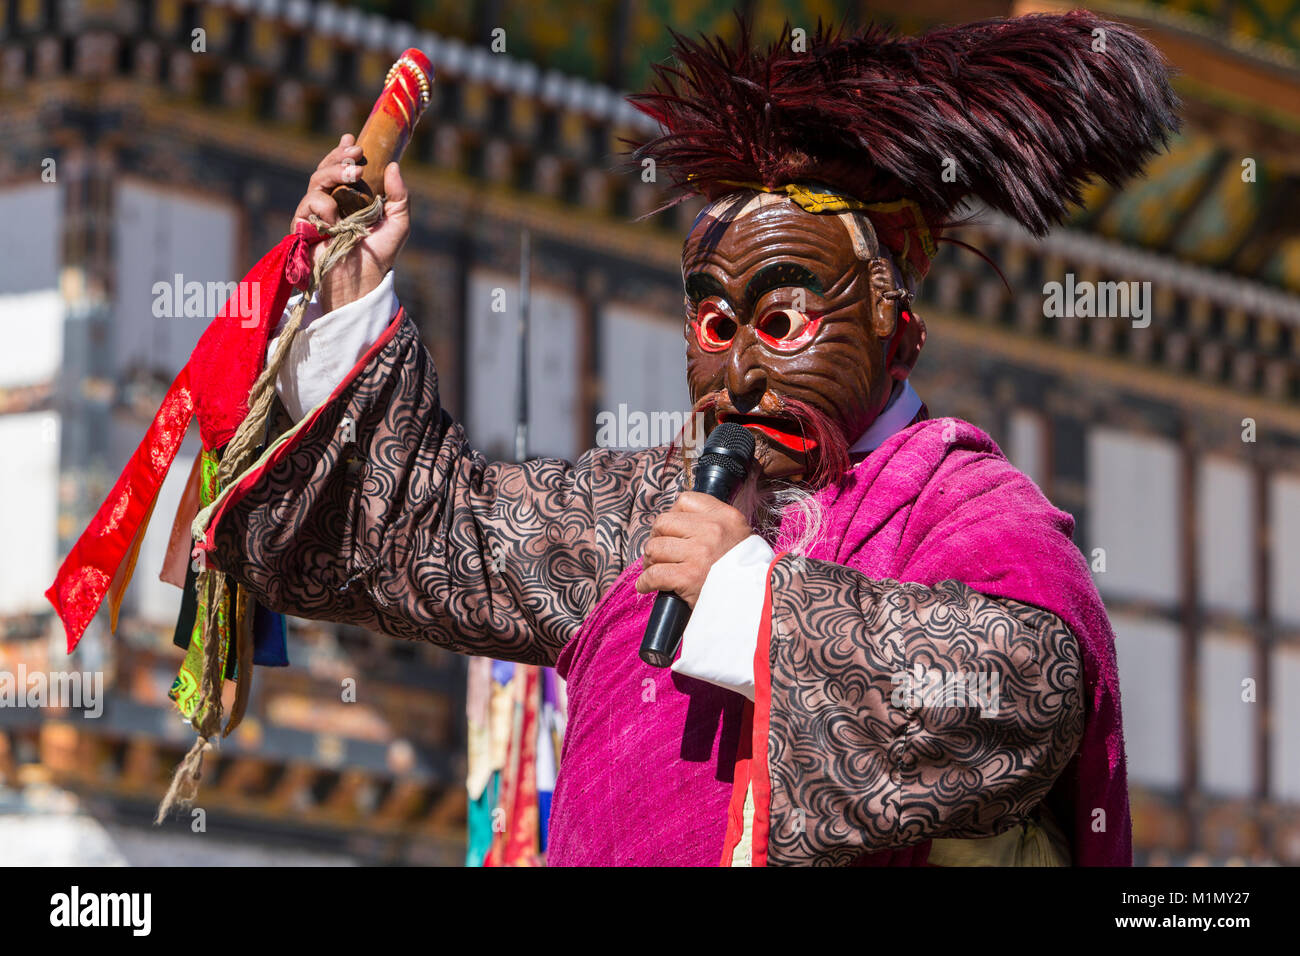 Bumthang, Bhutan.  An Atsara (Clown, Jester) Performs during Warm-up for a Religious Ceremony at Jambay Lhakhang (Monastery/Temple), near Jakar.  He i Stock Photo